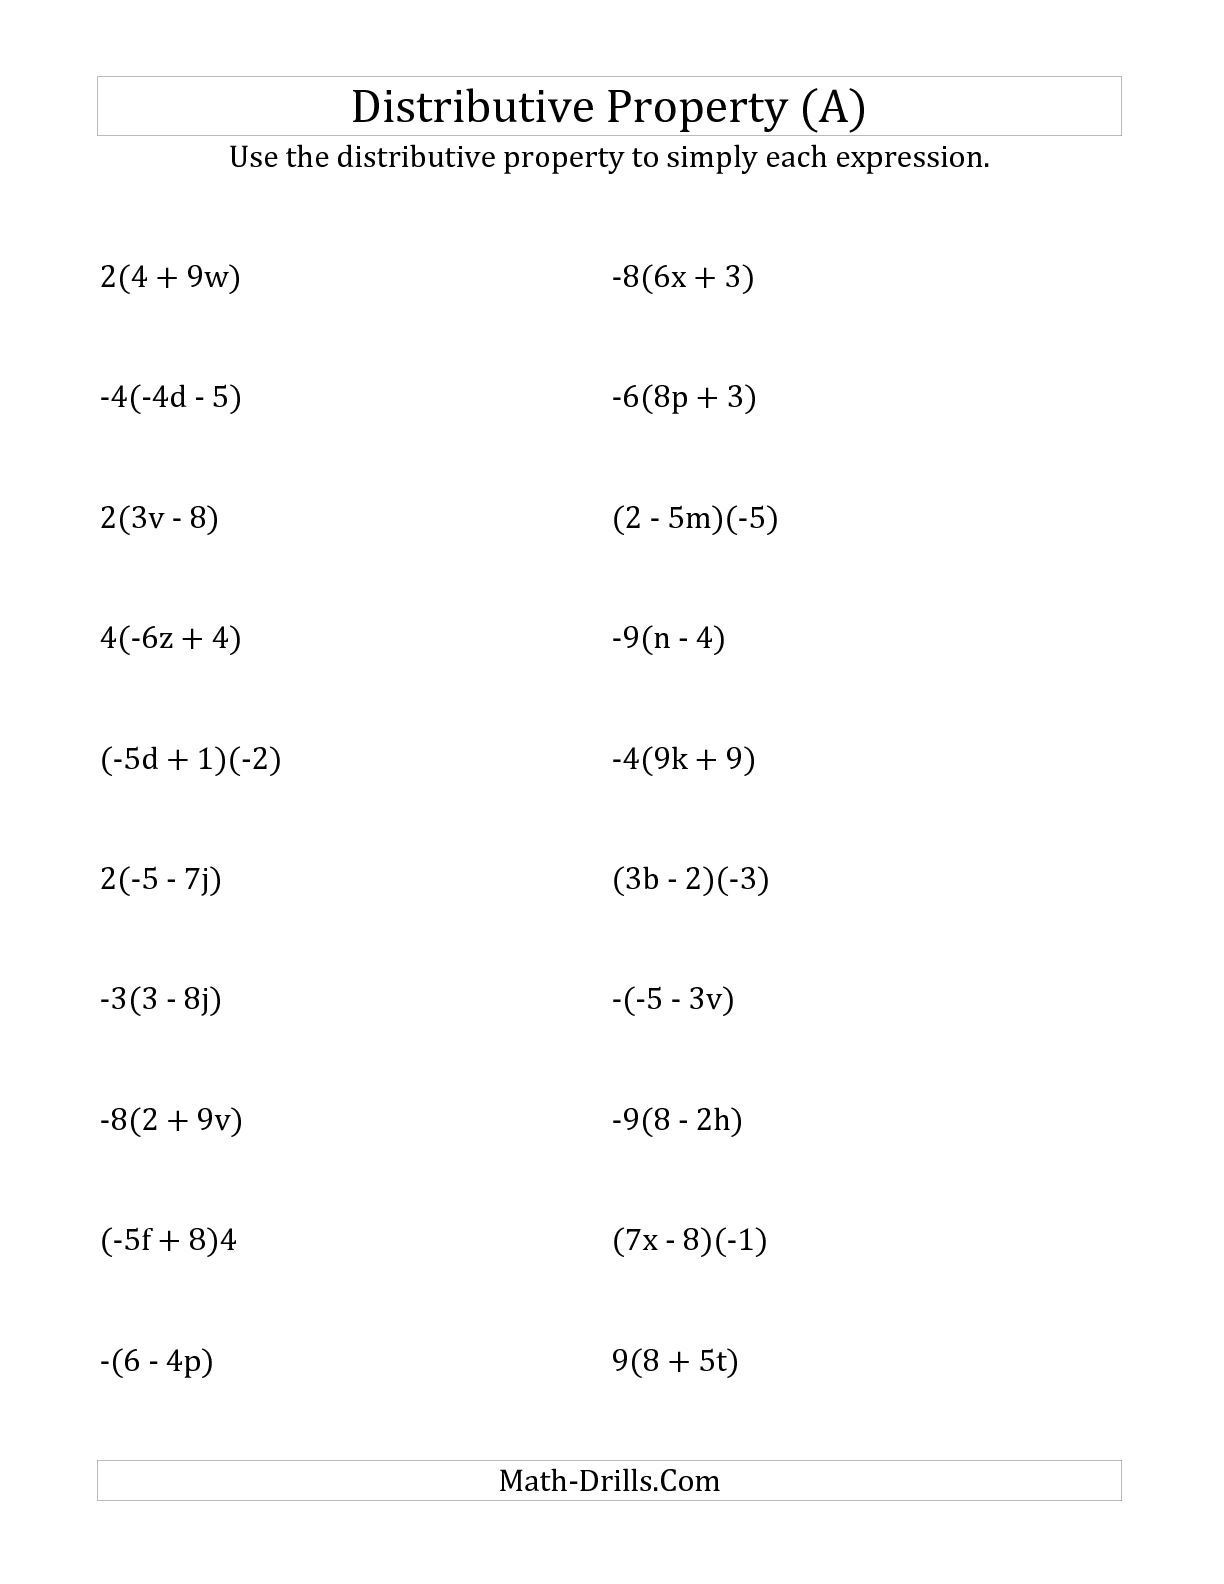 Distributive Property Worksheets 9th Grade the Using the Distributive Property Answers Do Not Include